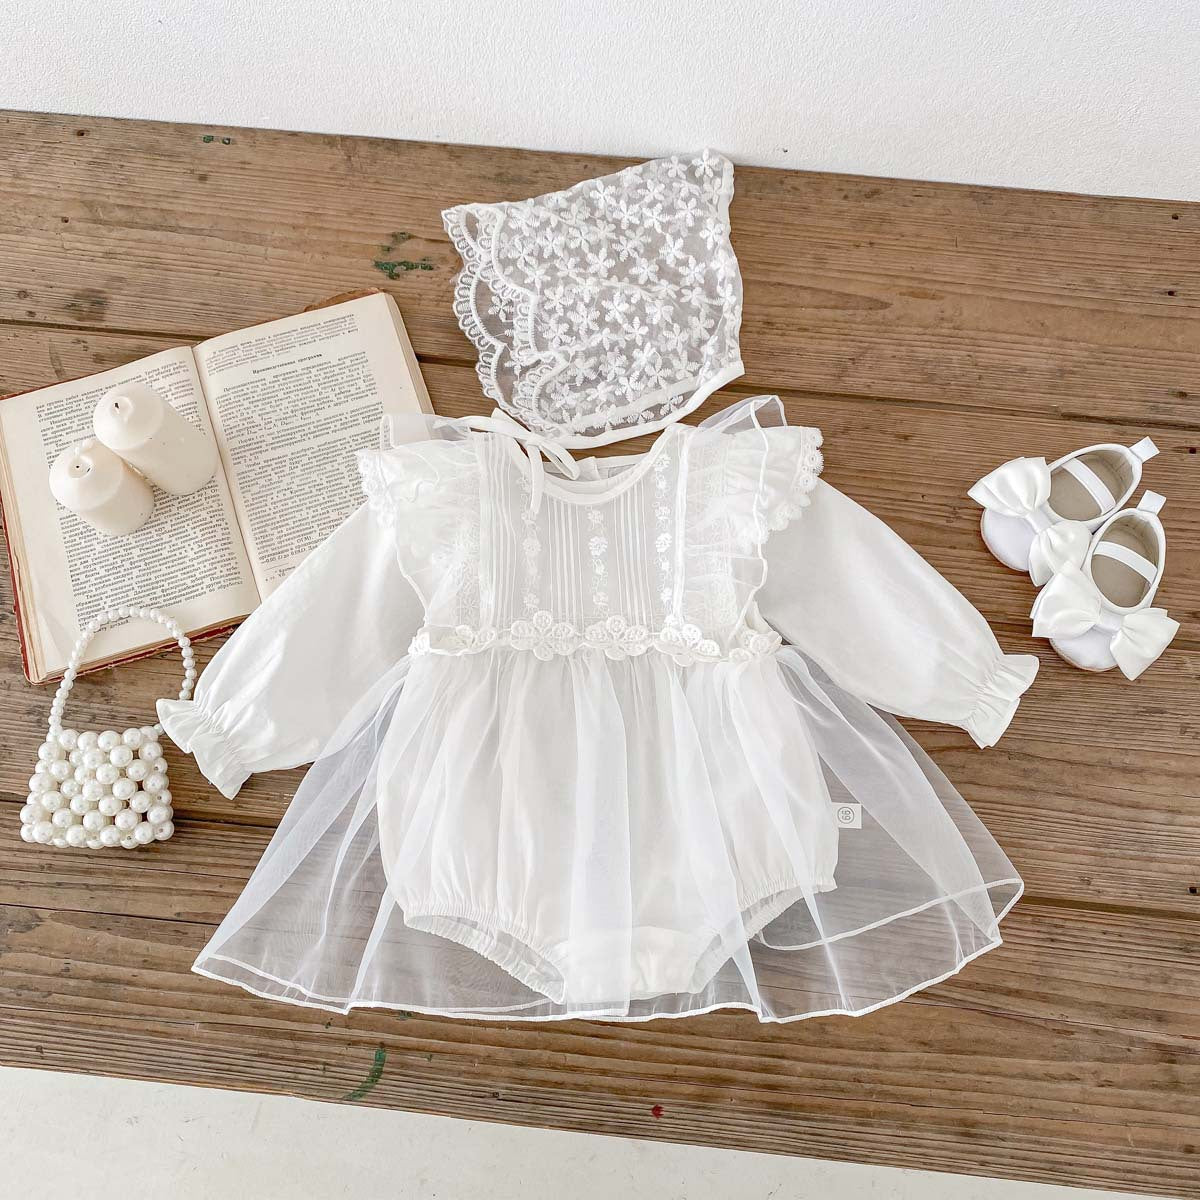 Spring Baby White Embroidery Lace Mesh Princess Onesie Dress For Girls